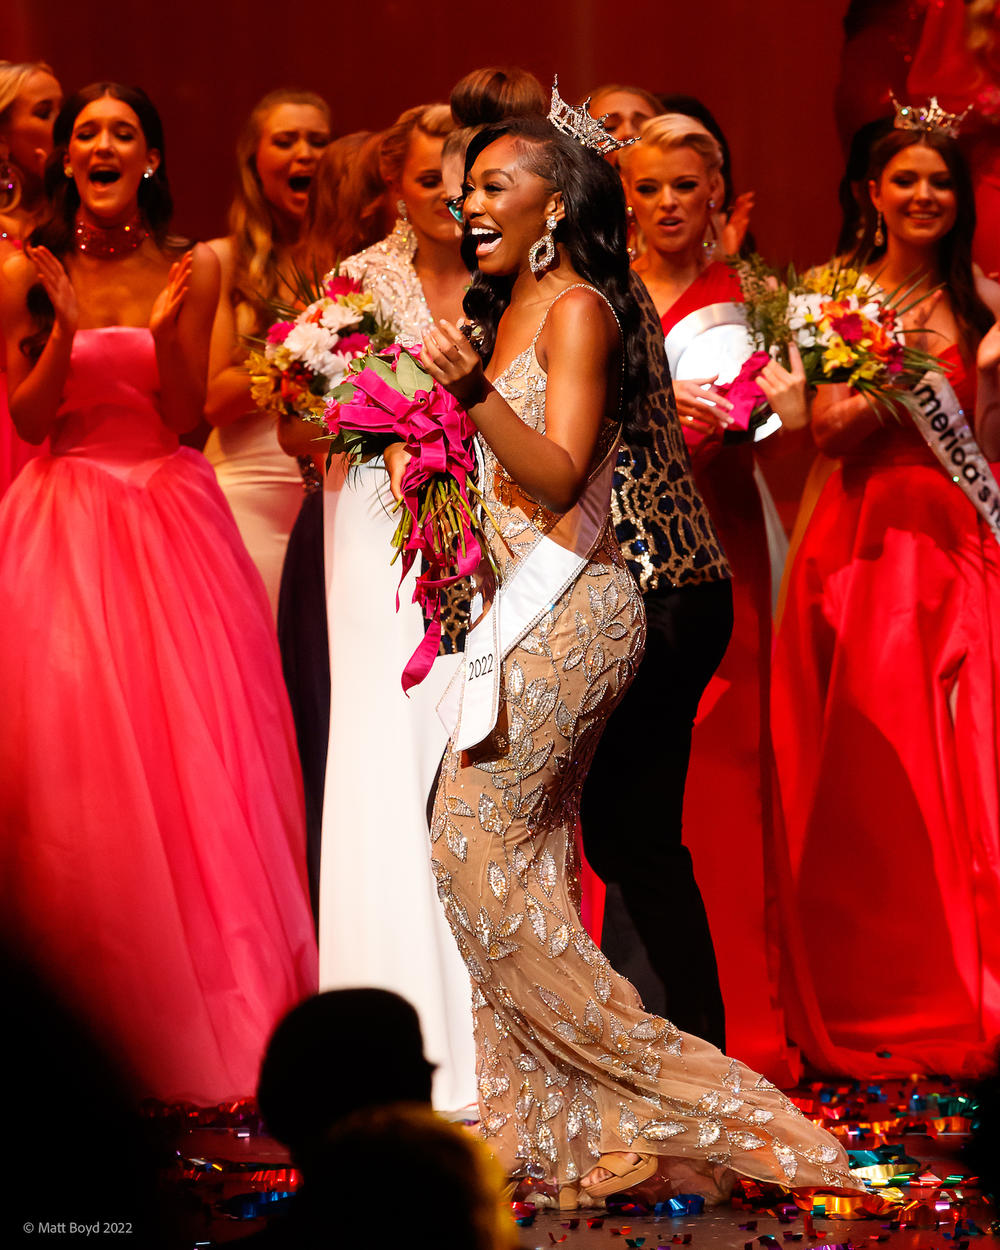  Kelsey Hollis, the new Miss Georgia, walks across the pageant stage.